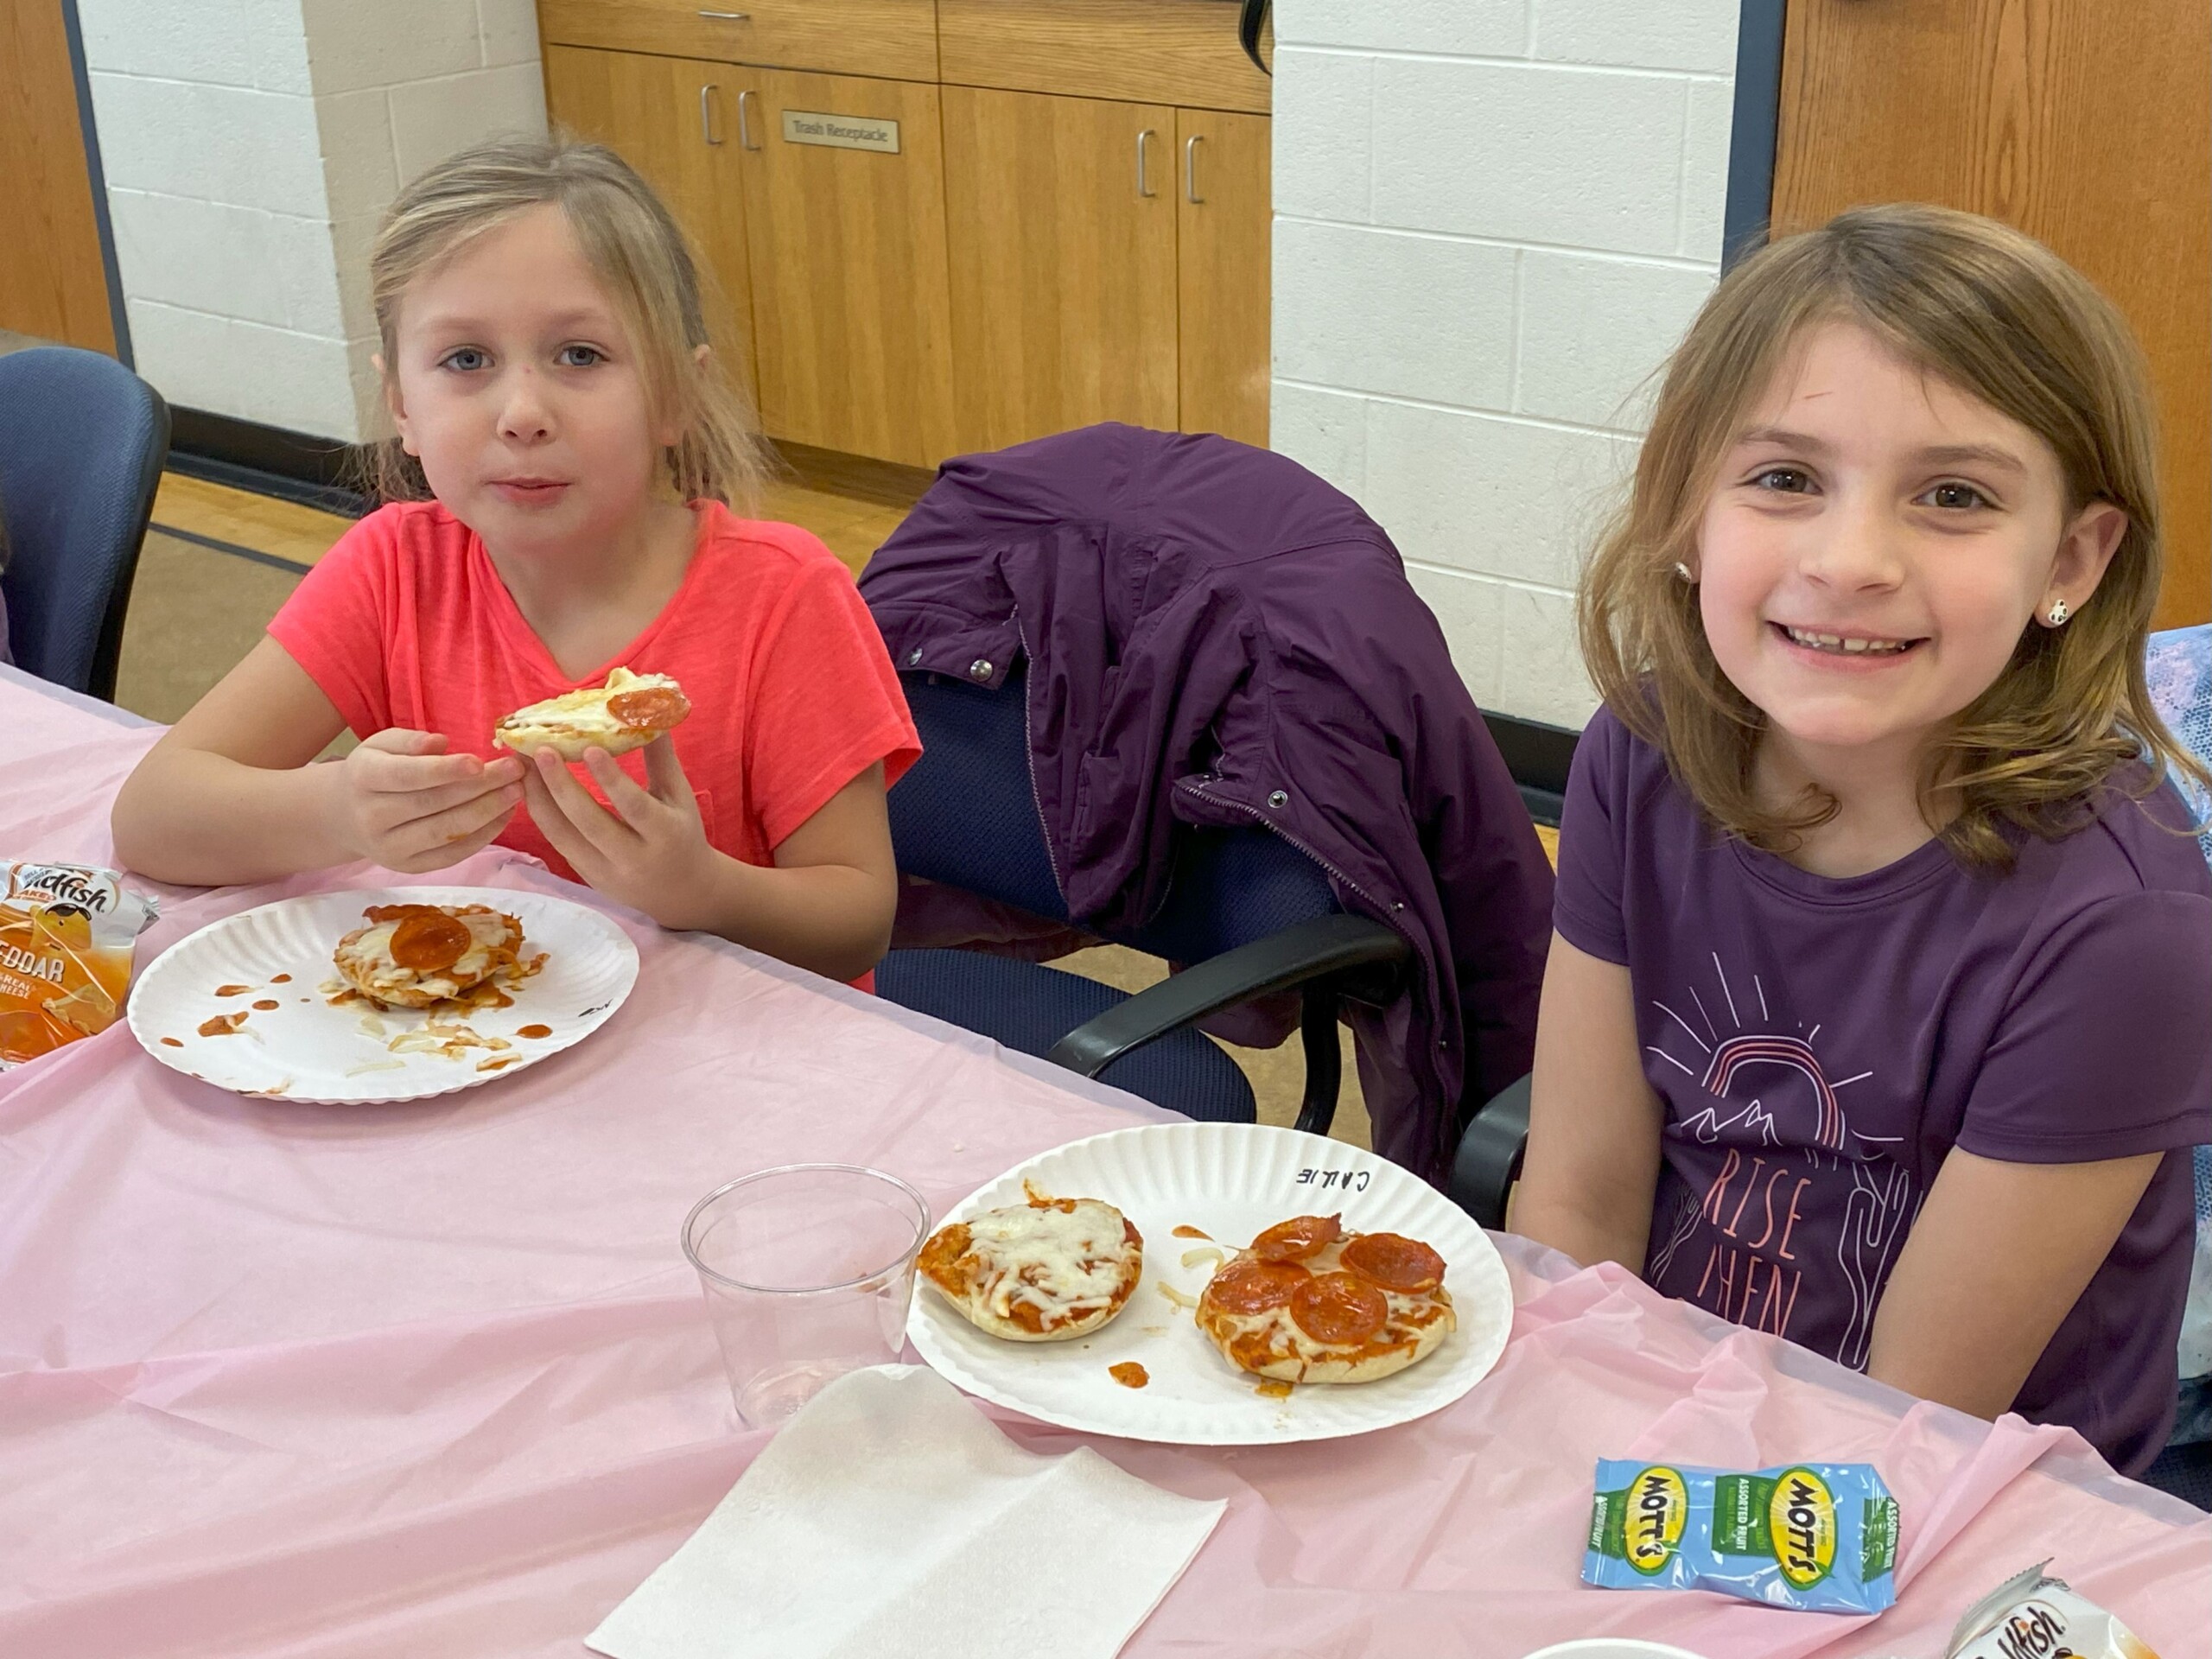 2 young girls enjoying a pizza party with snacks